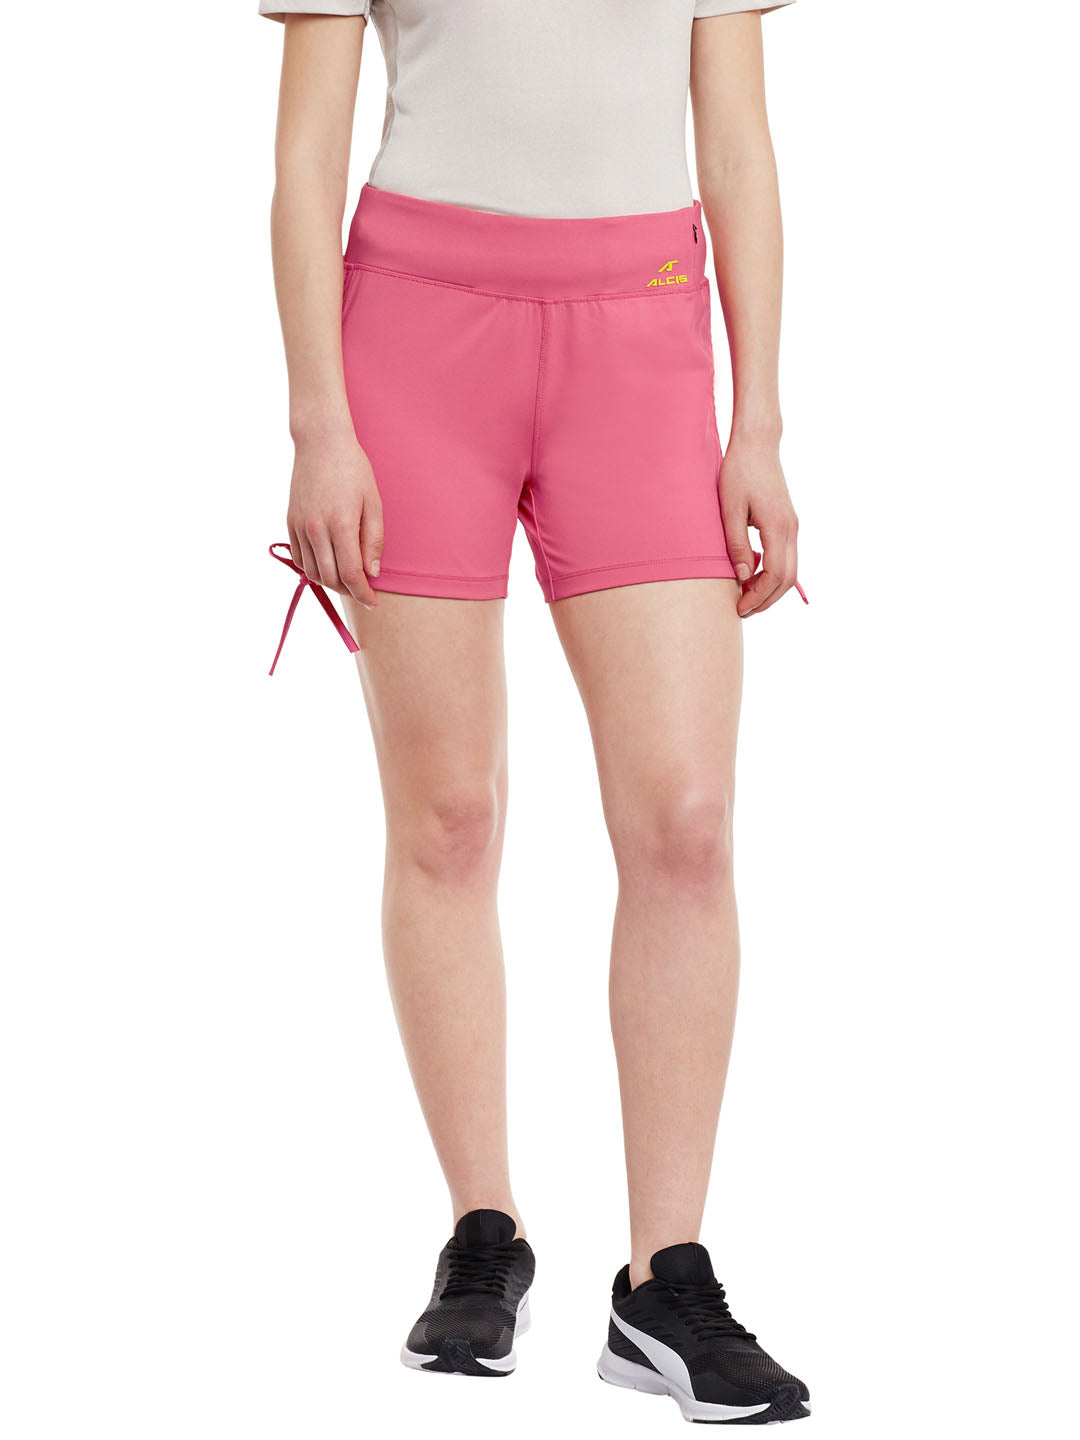 Women Solid Pink Shorts AKYGWSO01110149-S